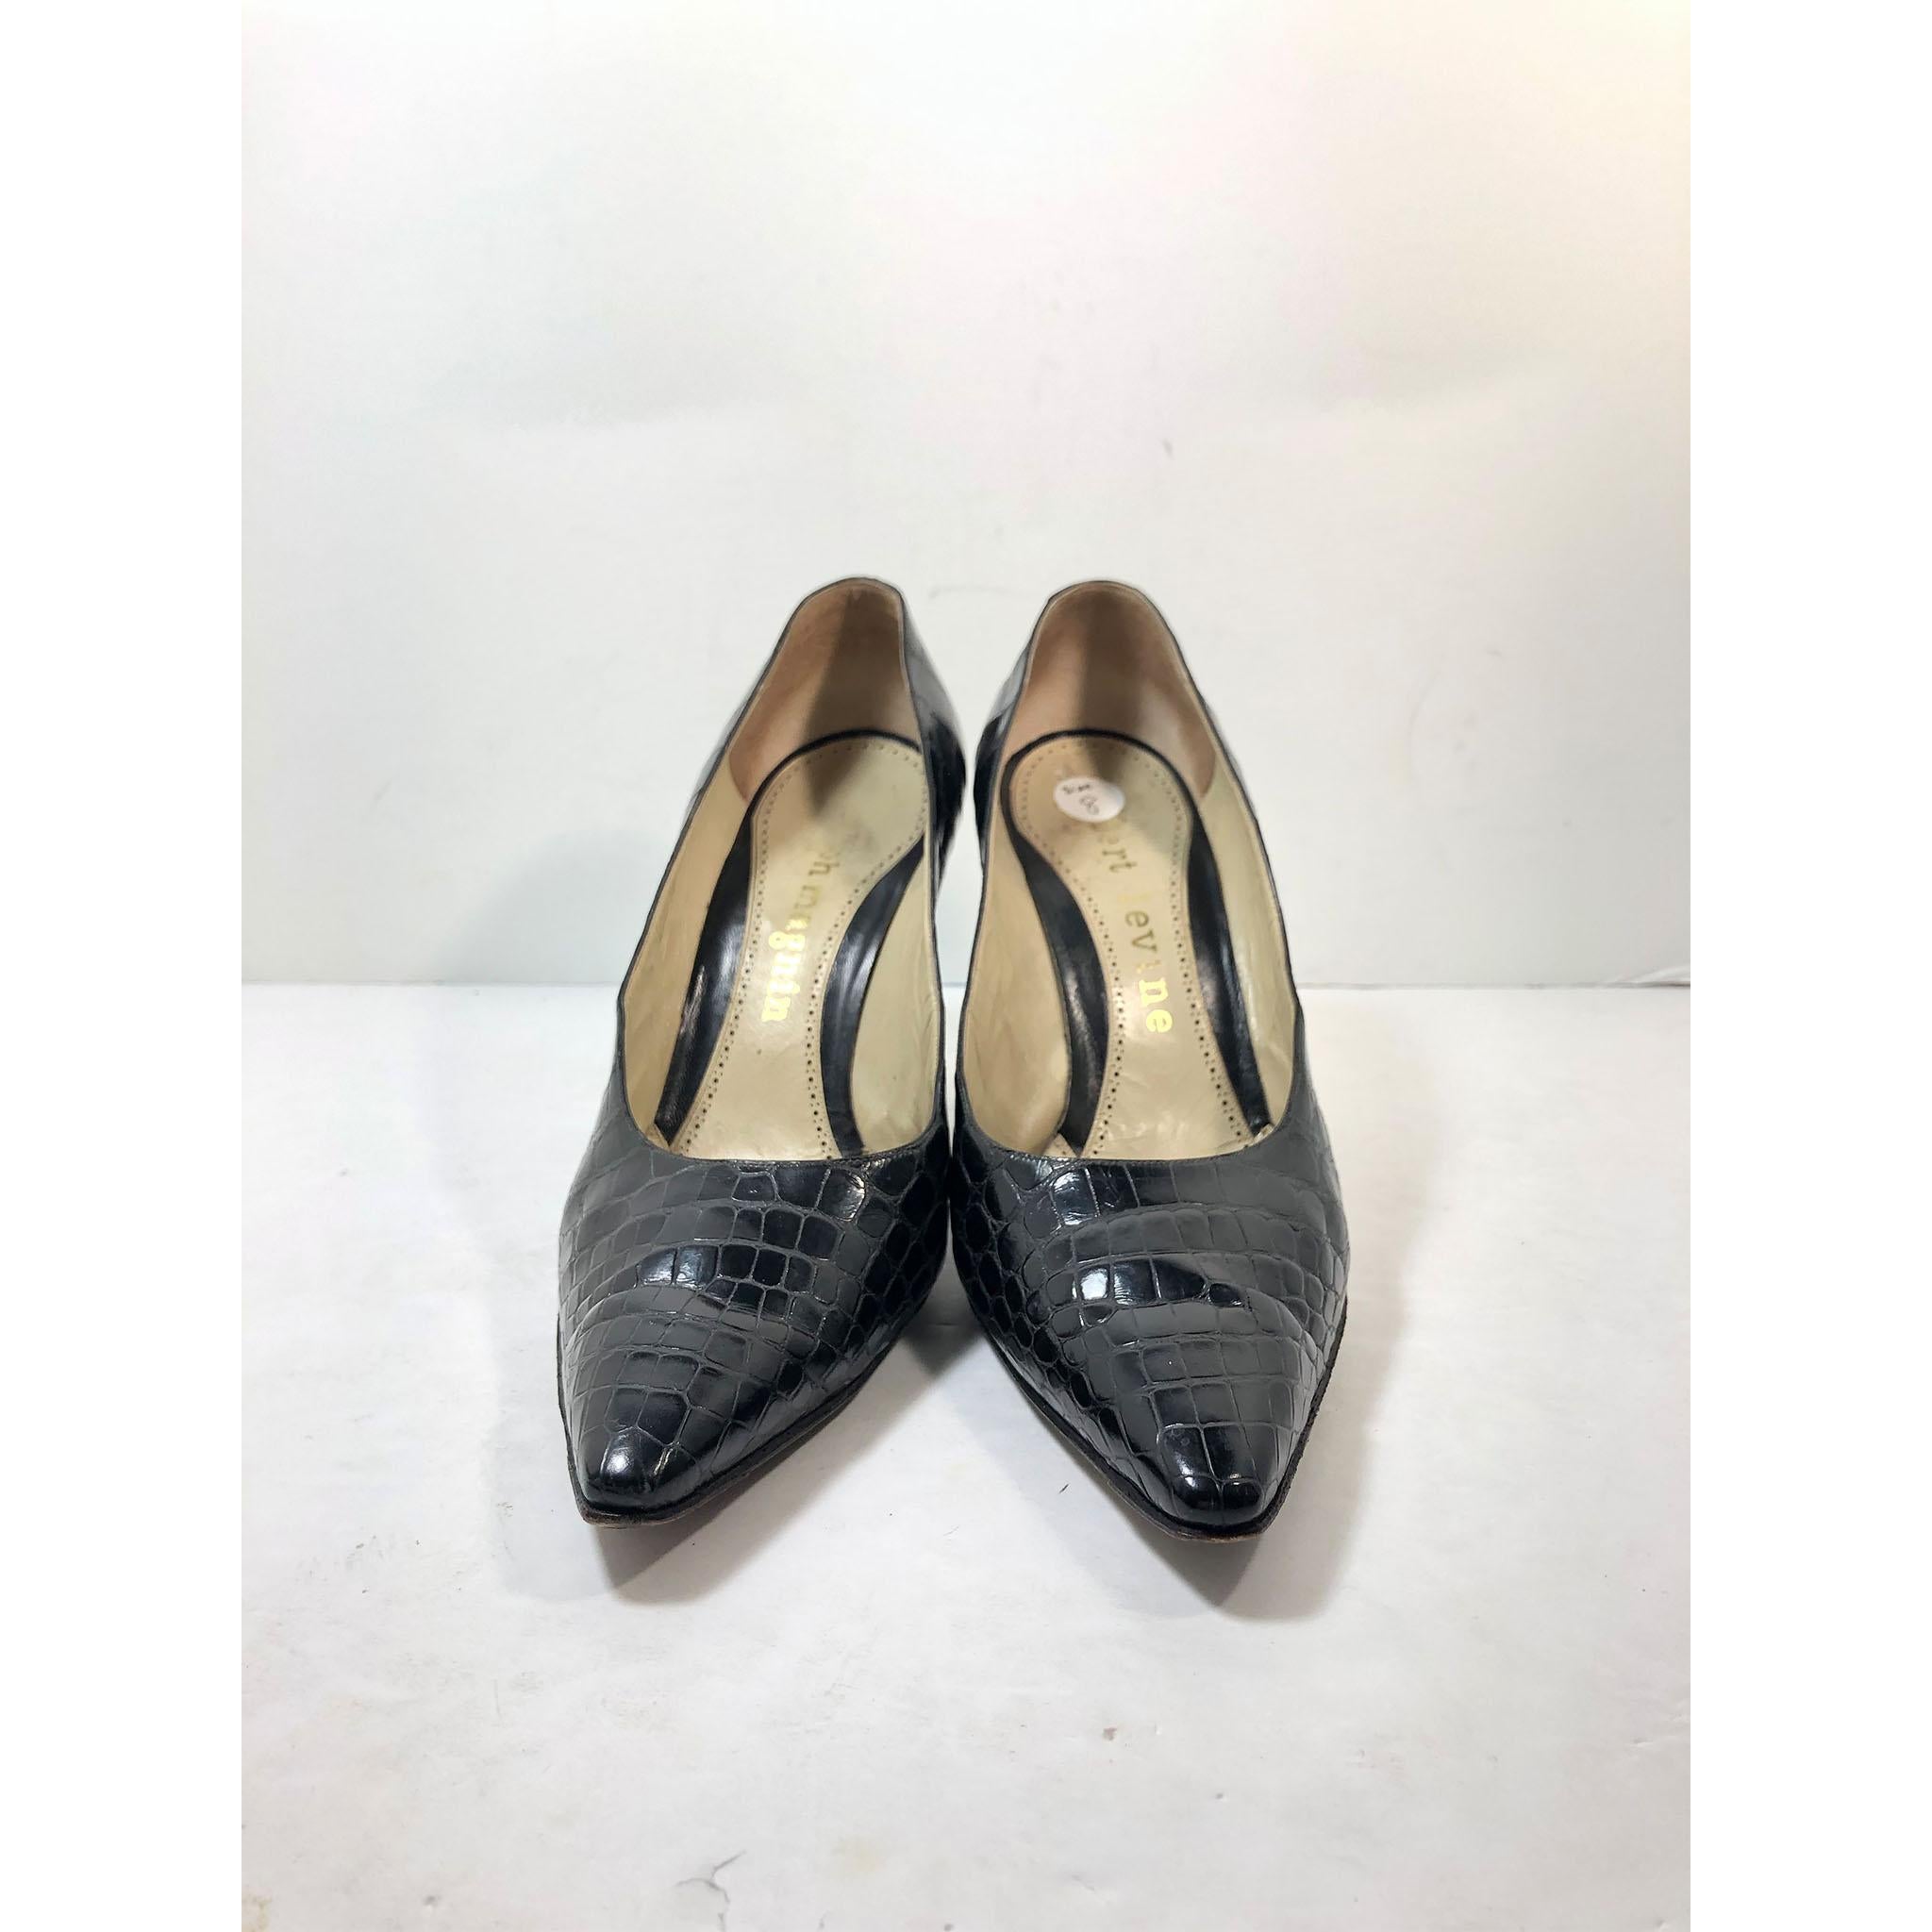 HERBERT LEVINE Black Alligator Pumps Size 8 In Good Condition For Sale In Los Angeles, CA